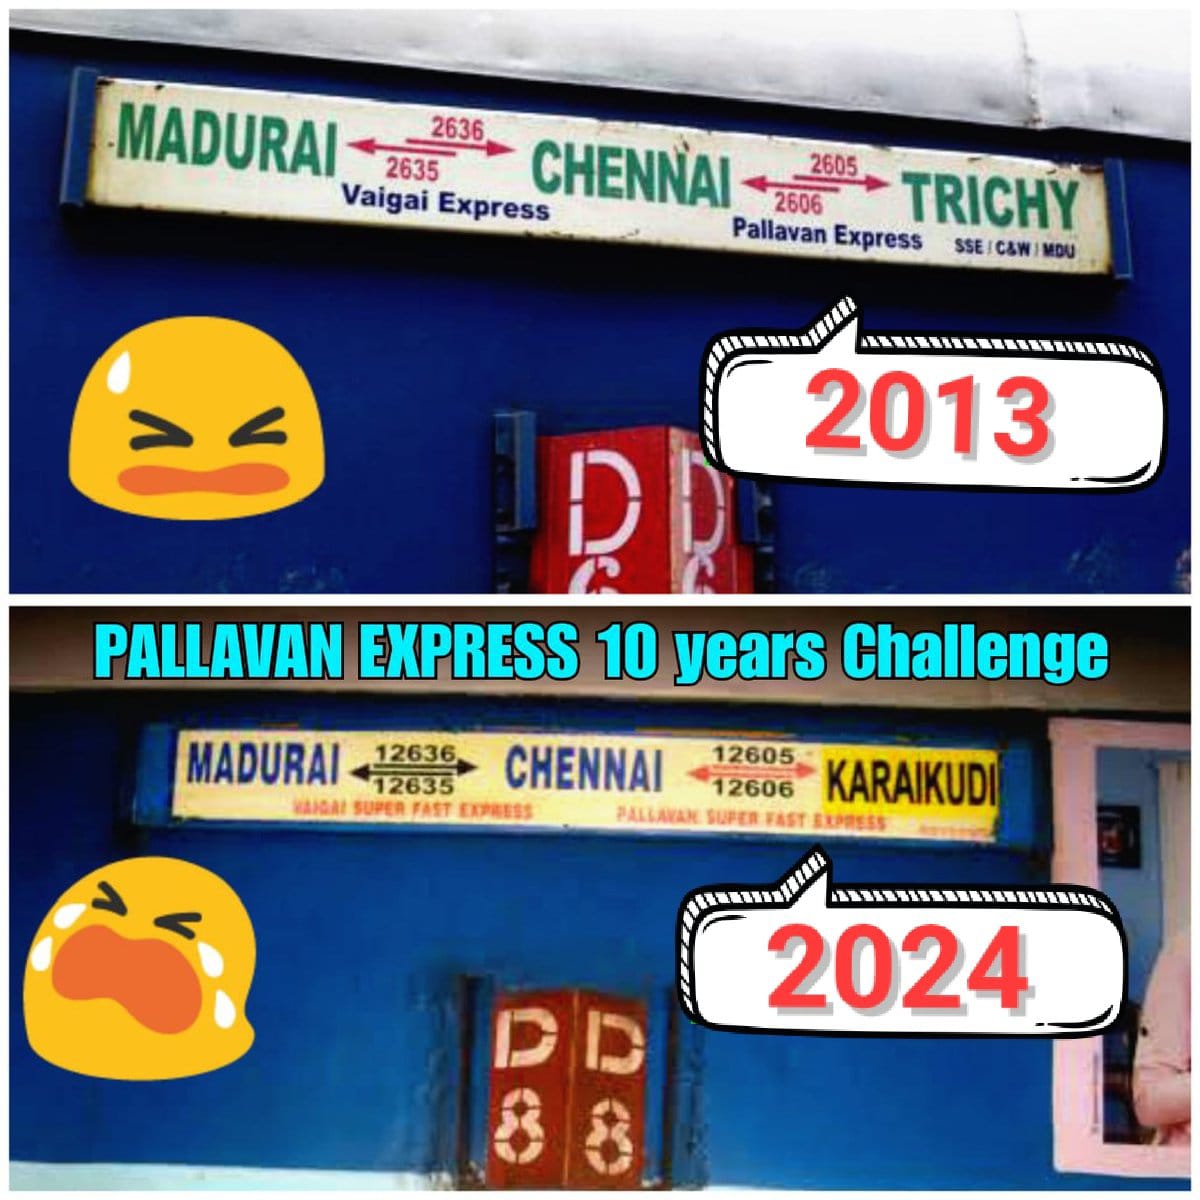 Trichy peoples are suffering without proper seats in pallavan Express . This Extension is Nowhere Justified and its Prime train to Karaikudi . Its a big Blunder which Made Trichy , Srirangam , Lalgudi peoples to suffer . Short terminate pallavan to trichy itself .